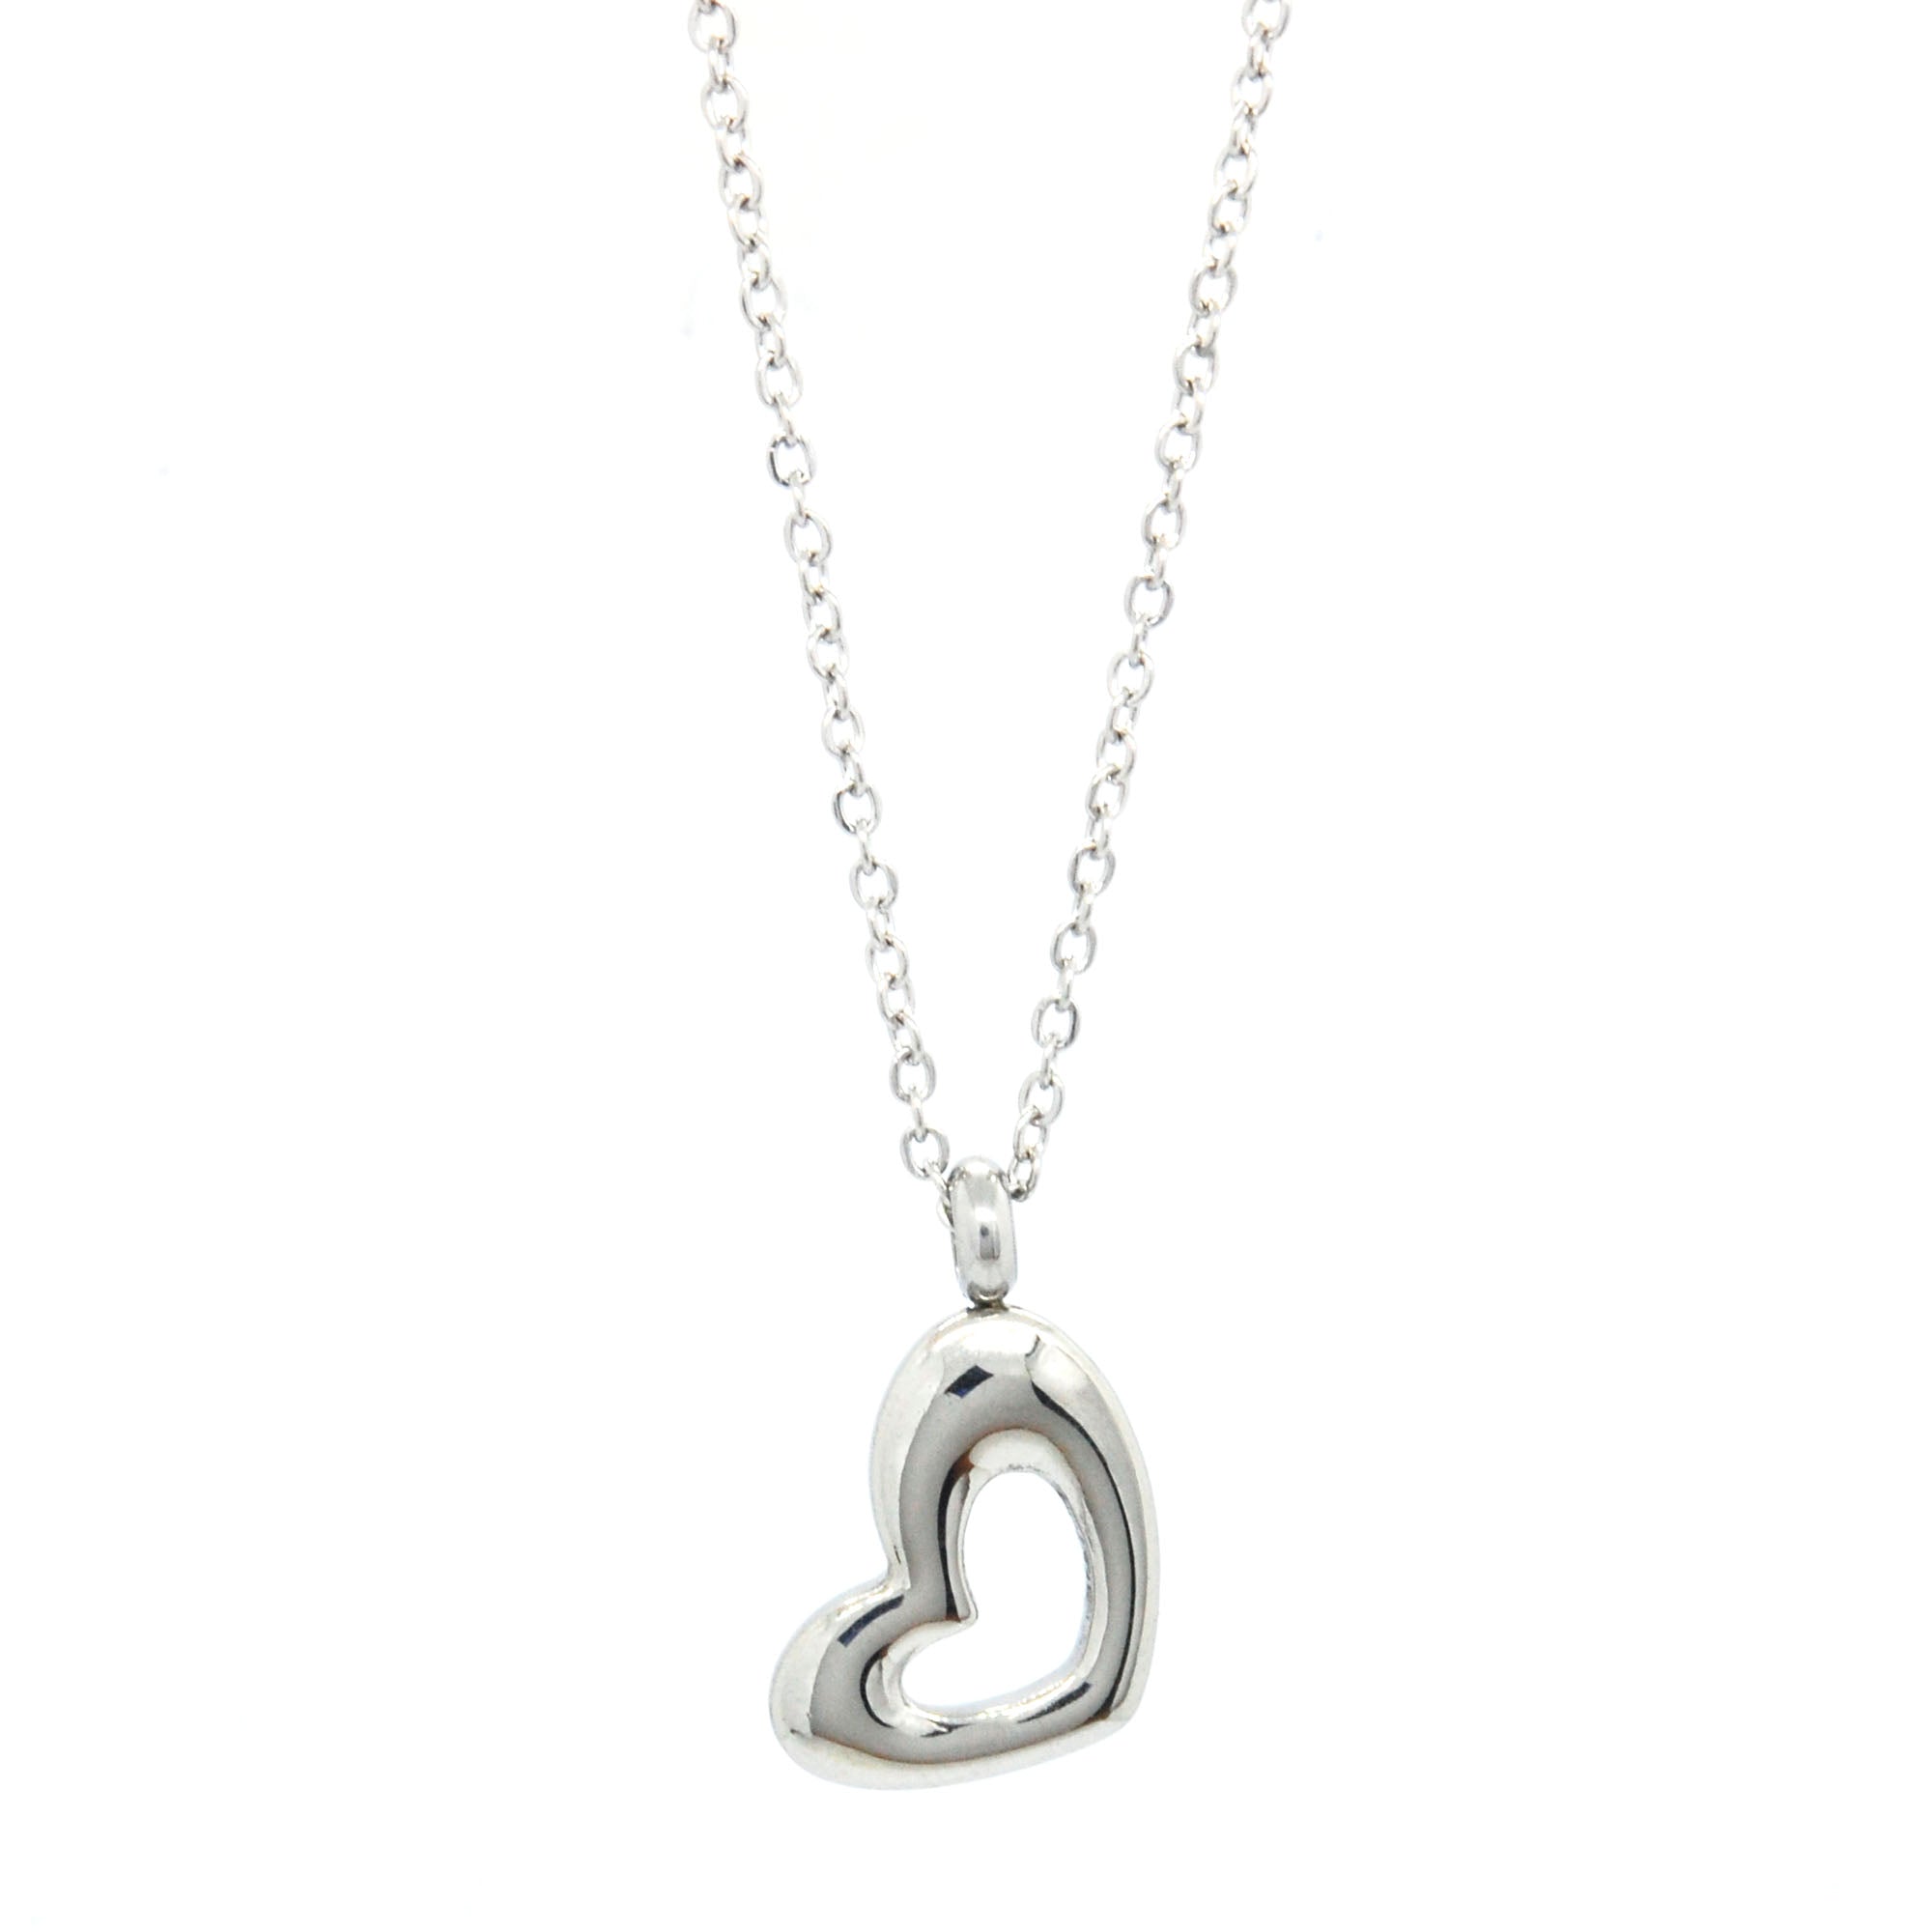 ESN 5604: Alicia Side Heart Outline Necklace w/ 18" + 2" Chain